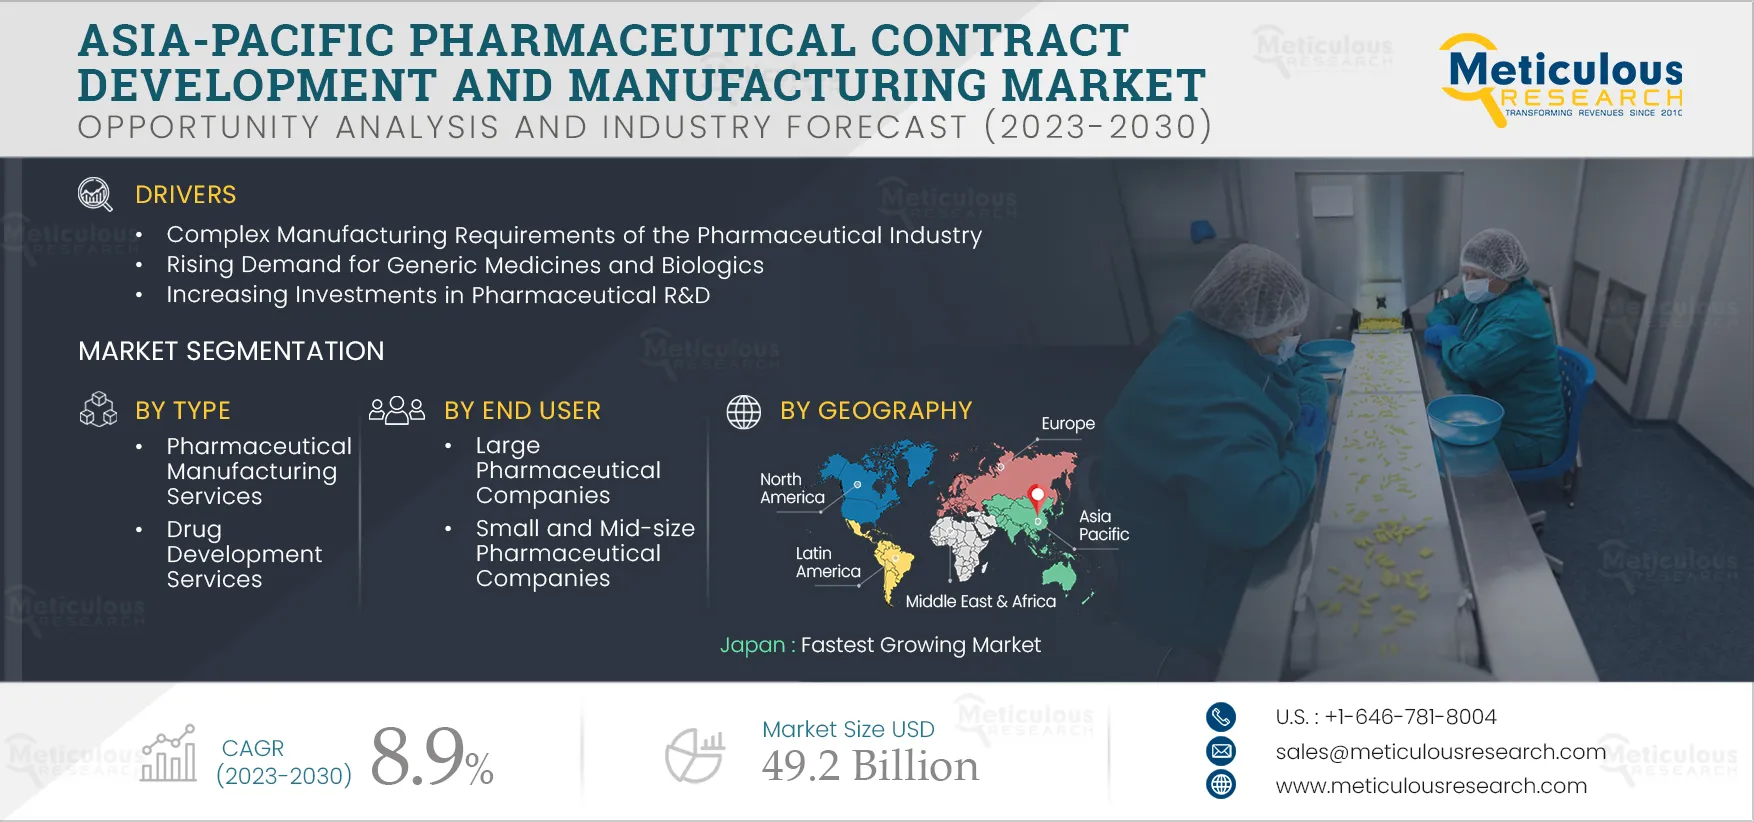 Asia-Pacific Pharmaceutical Contract Development and Manufacturing Market